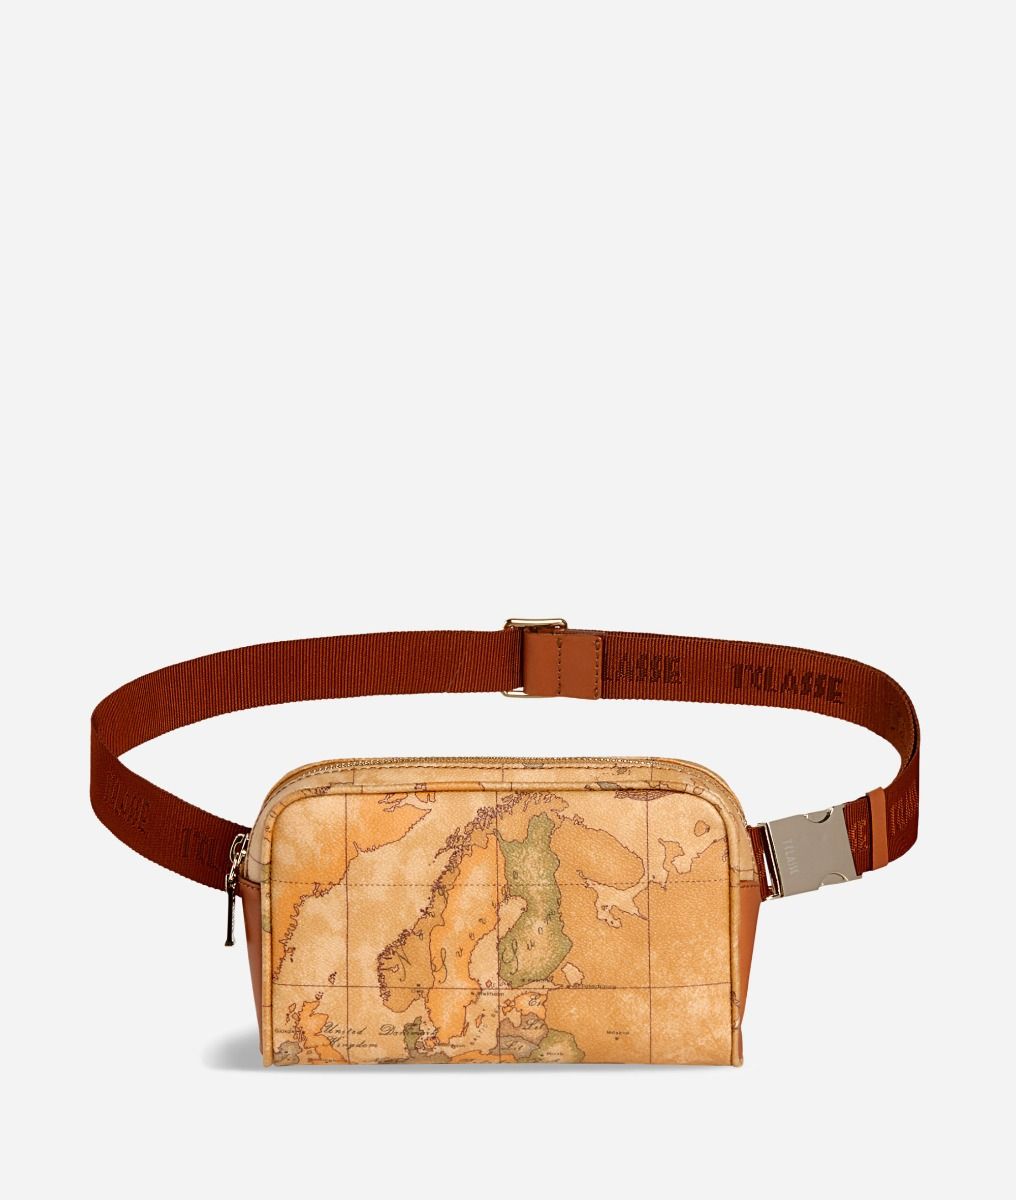 Geo Classic Belt bag with fabric strap,front